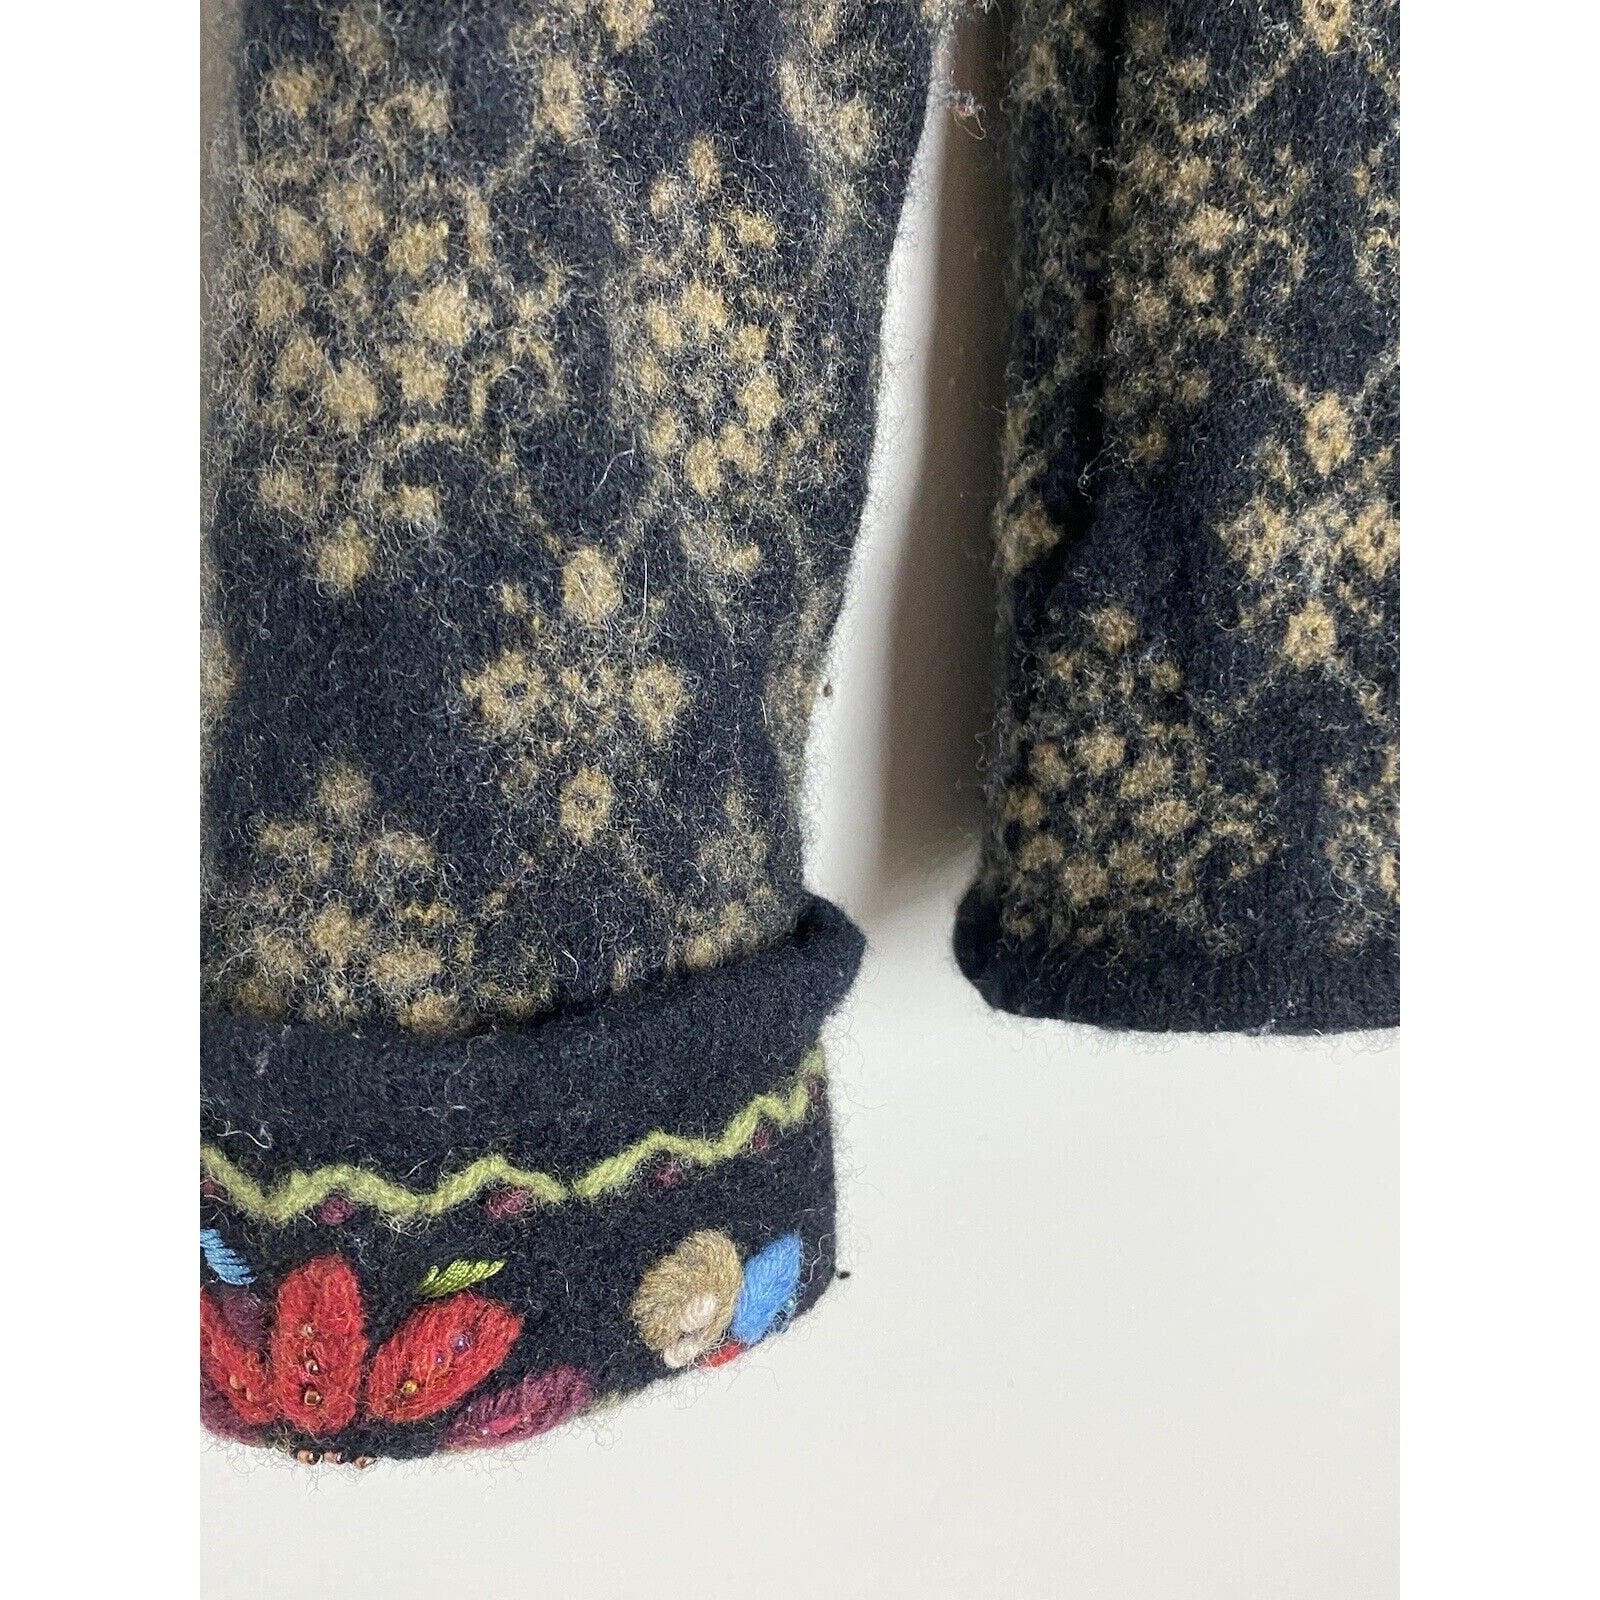 Affordable Icelandic Design Womens Full Zip Wool Embroidered Cardigan Sweater Size S/M VTG ozvcQvapb online store